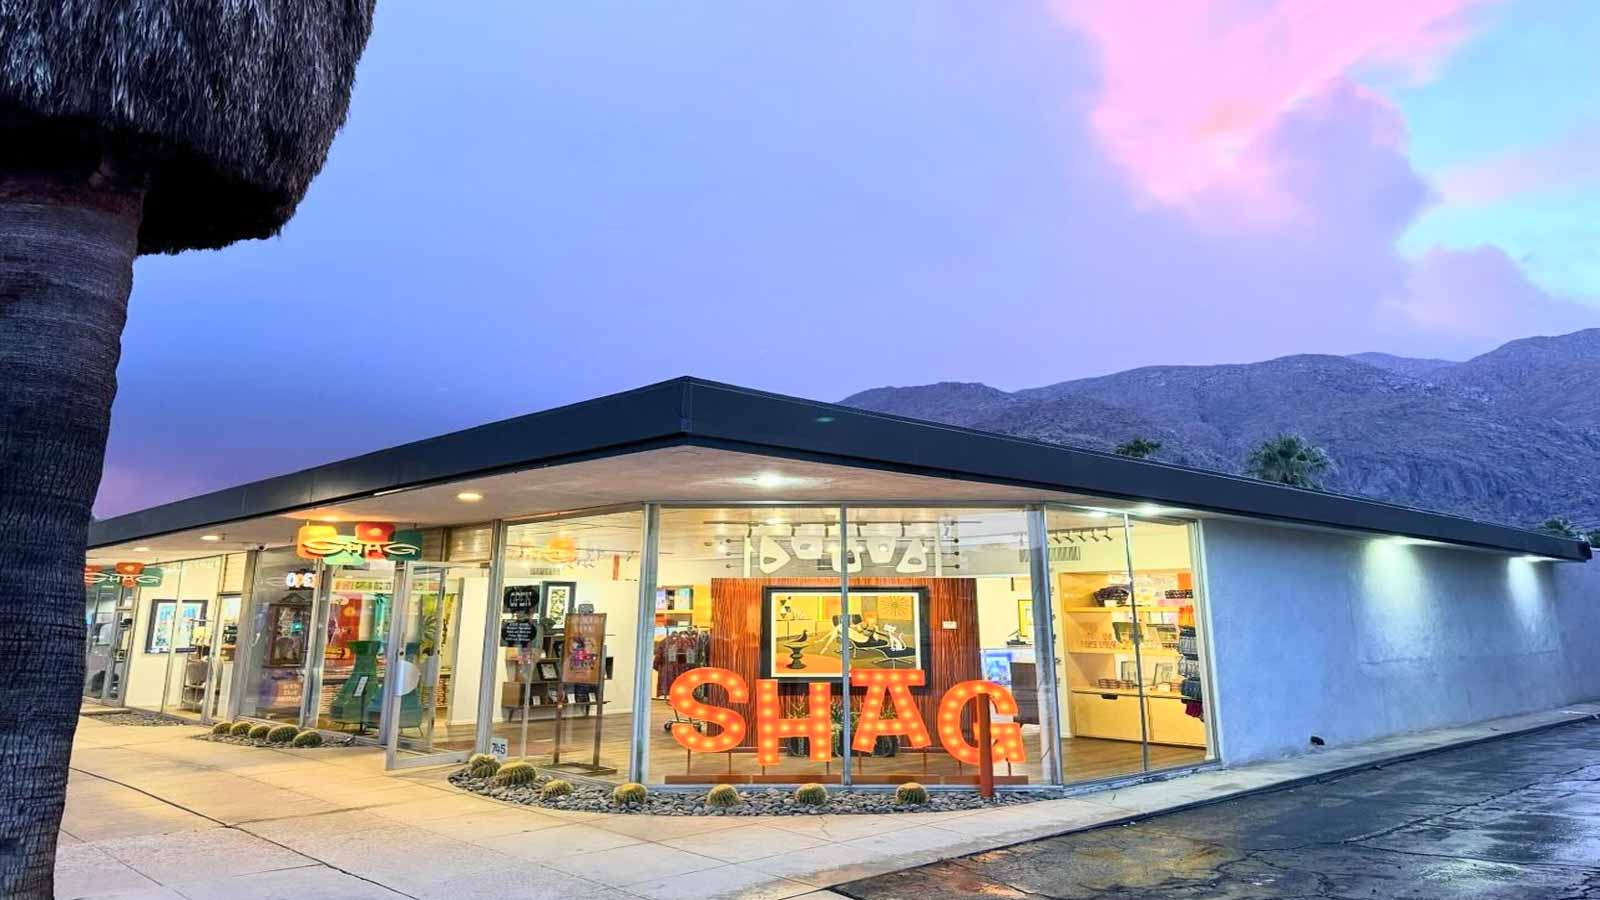 <p><span>745 North Palm Canyon Drive Palm Springs, CA, 92262</span></p><p><span>Shag is a lifestyle brand featuring the work of artist Josh Agle aka Shag. Their exclusive limited edition prints and merchandising consist of whimsical takes of cartoon-like characters in various scenes. Whether it be “goth night” at a local club or “the incognitos” at a pool party at Richard Neutra Kauffman’s desert house, patrons can pick up beach towels, mugs, and coasters as souvenirs from their Palm Springs trip. </span></p>